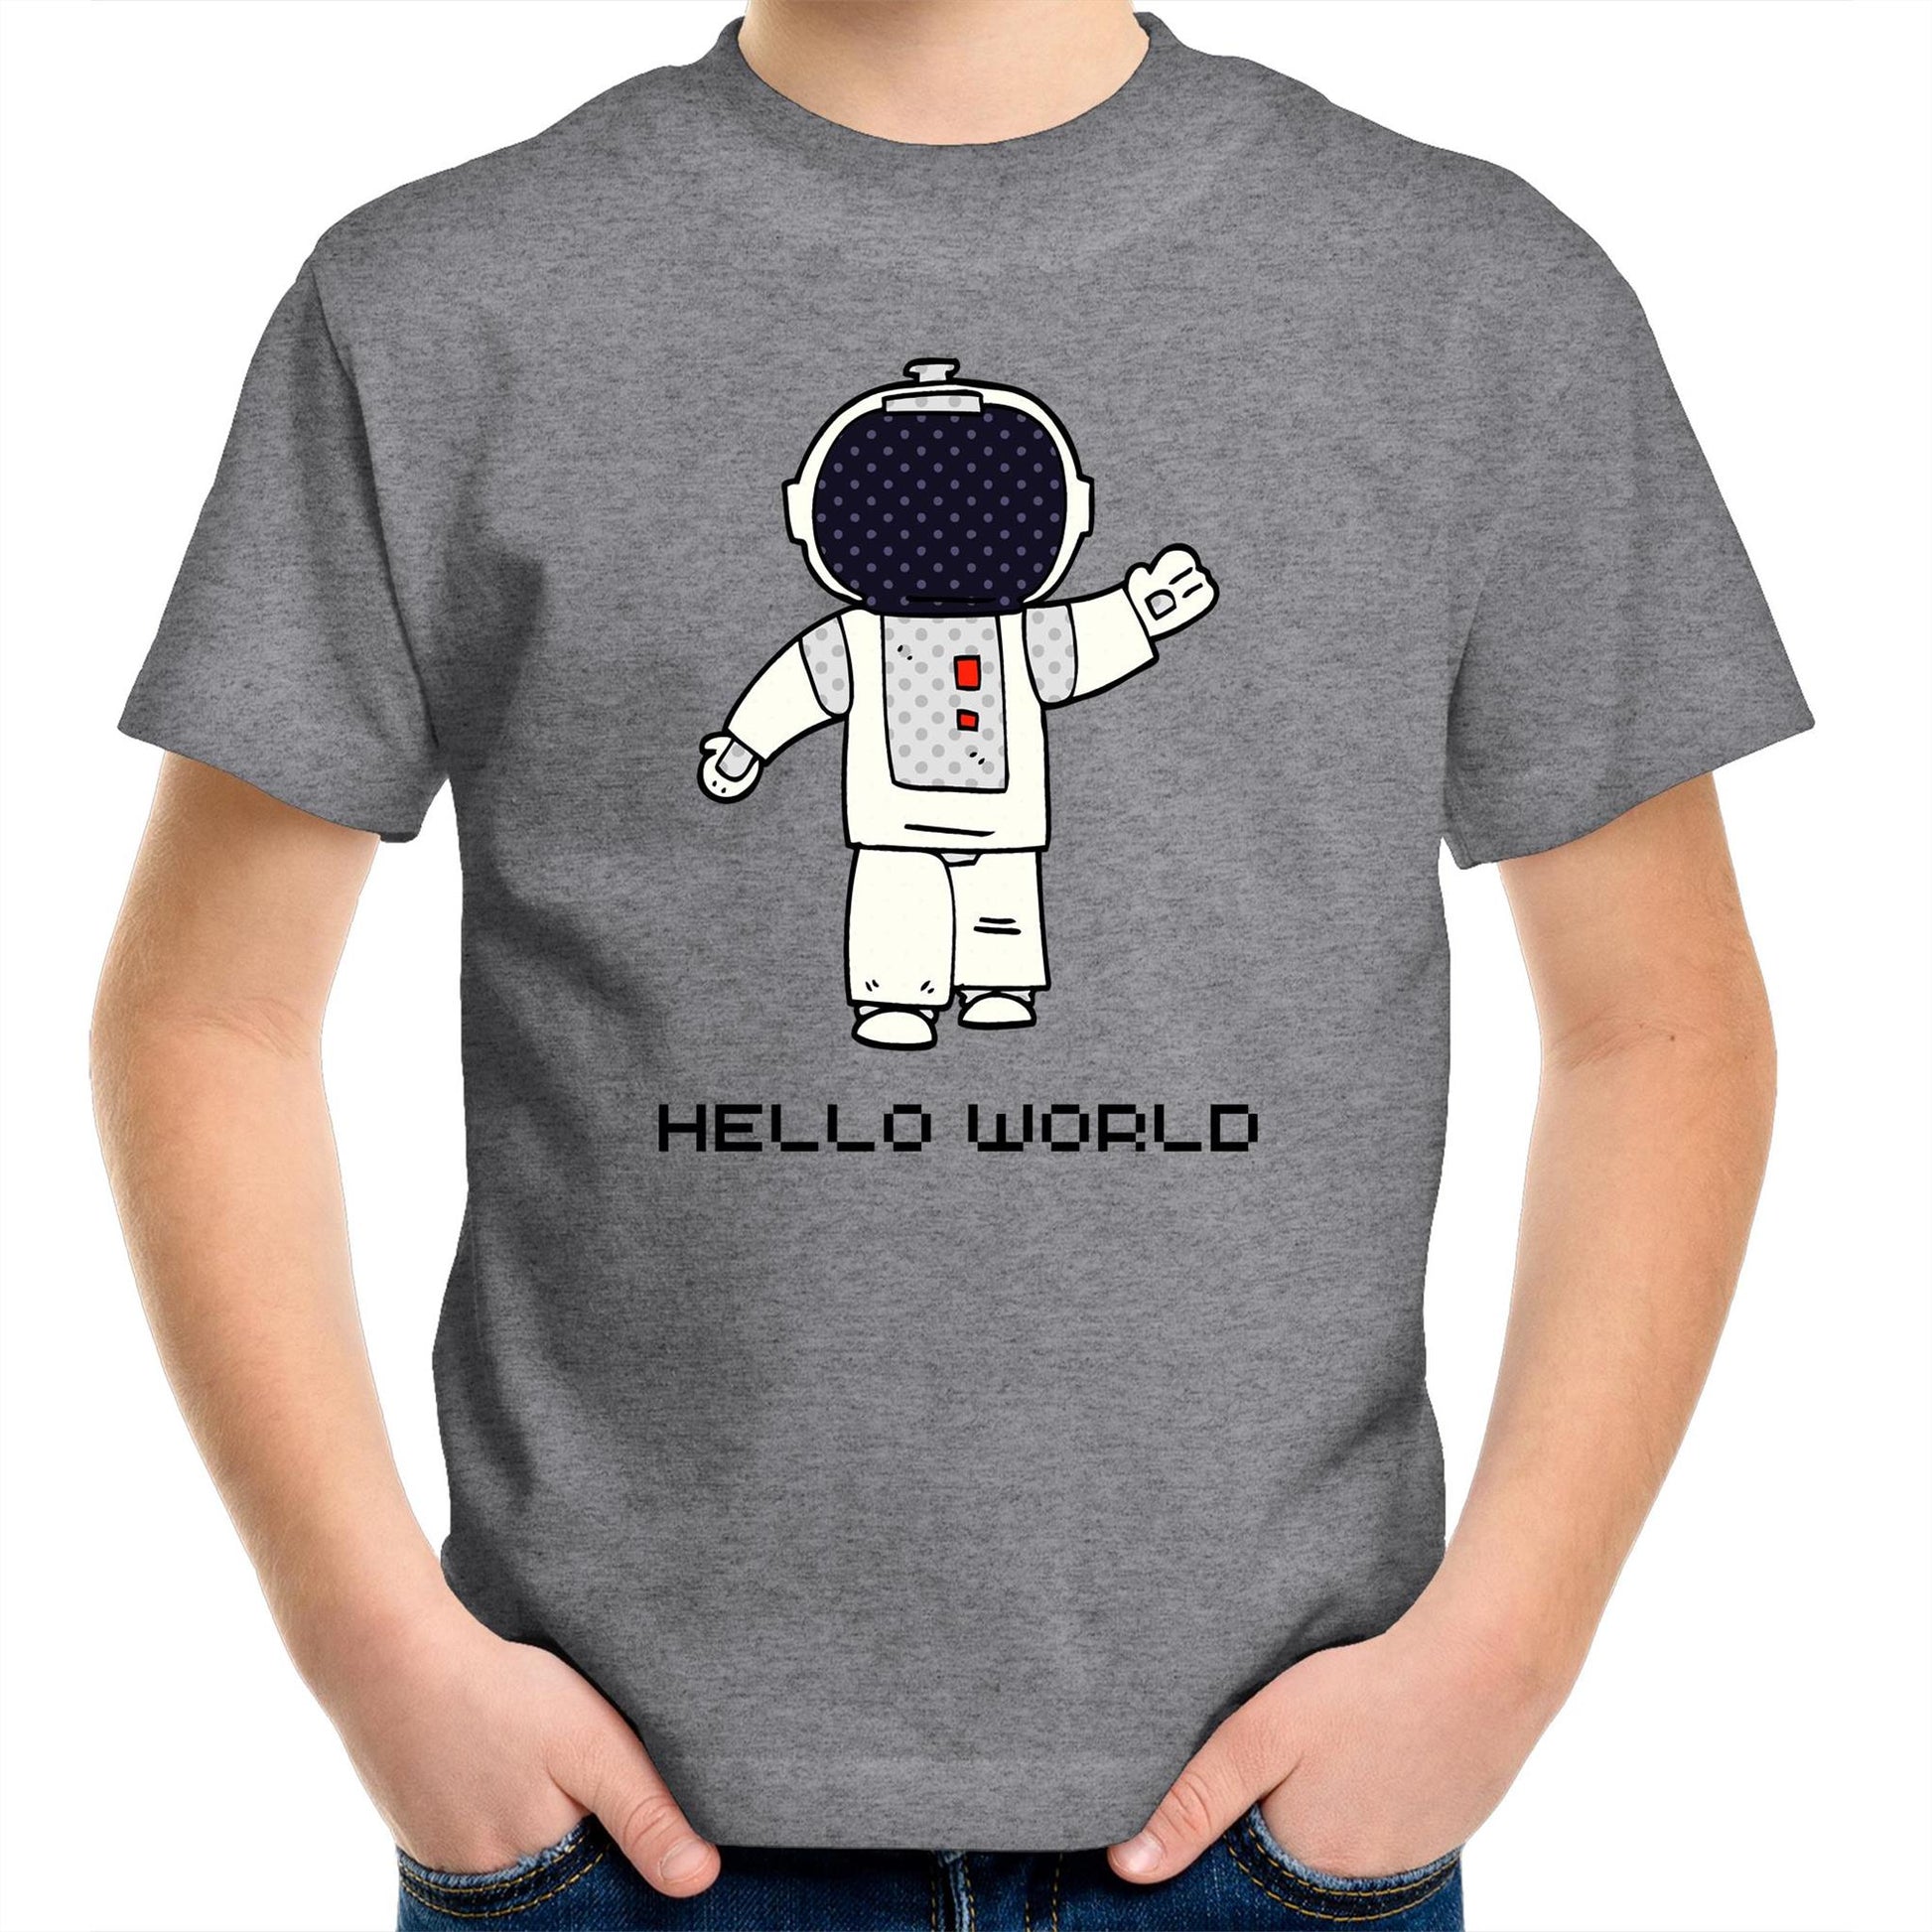 Astronaut, Hello World - Kids Youth T-Shirt Grey Marle Kids Youth T-shirt Space